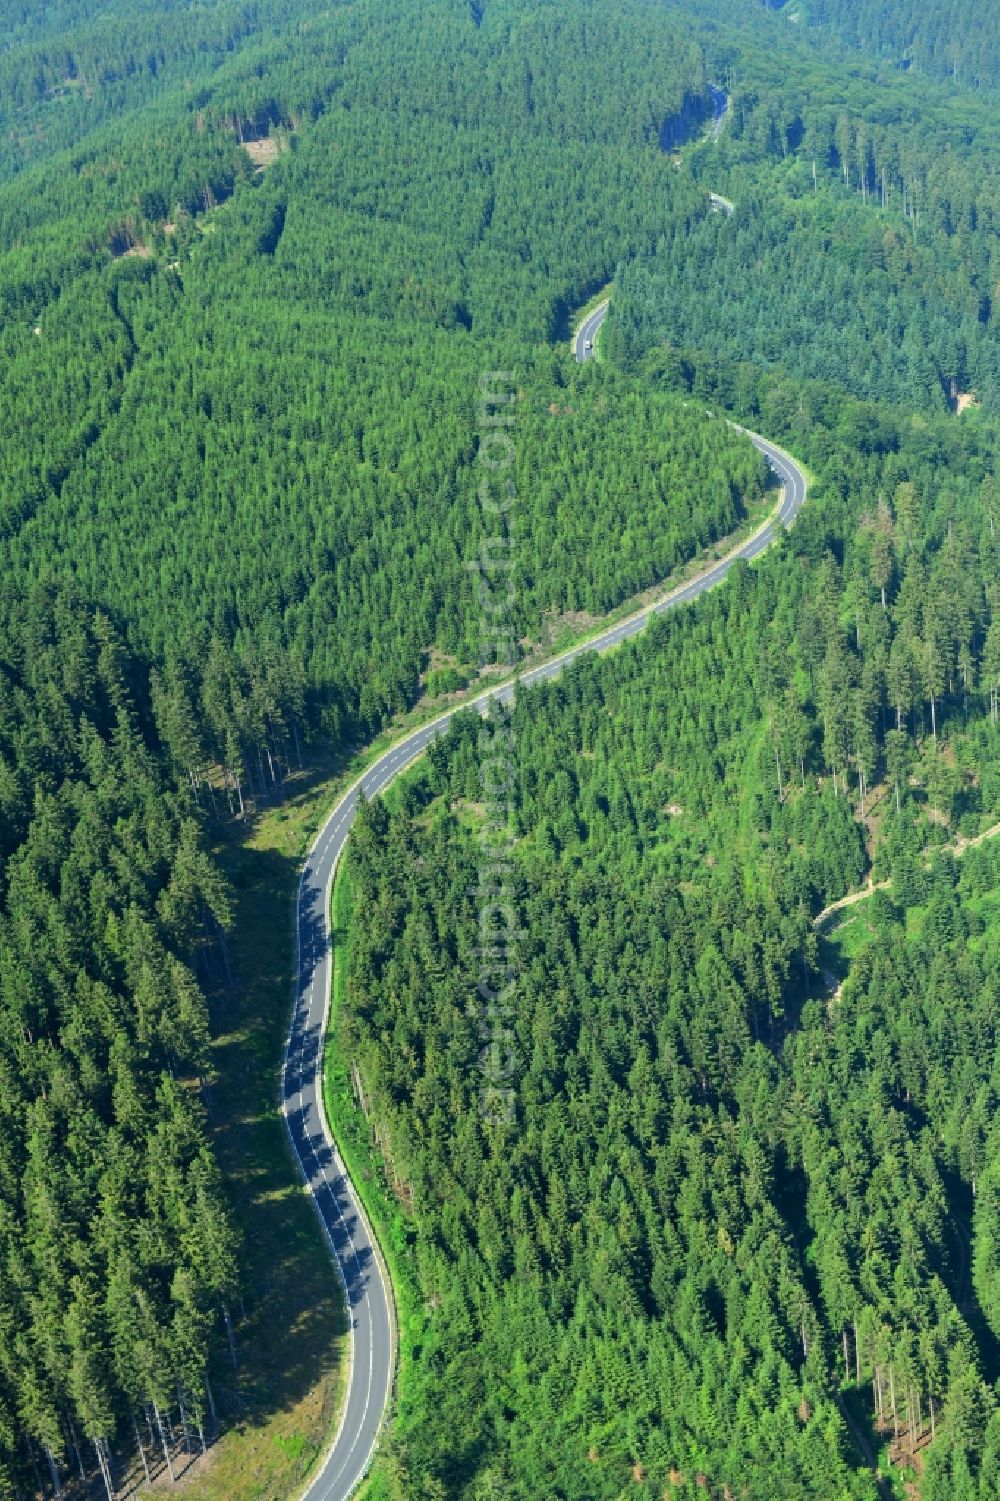 Hahnenklee from the bird's eye view: Serpentine-shaped curve of a road guide Bundesstrasse B 241 in Wald in Hahnenklee in the state Lower Saxony, Germany